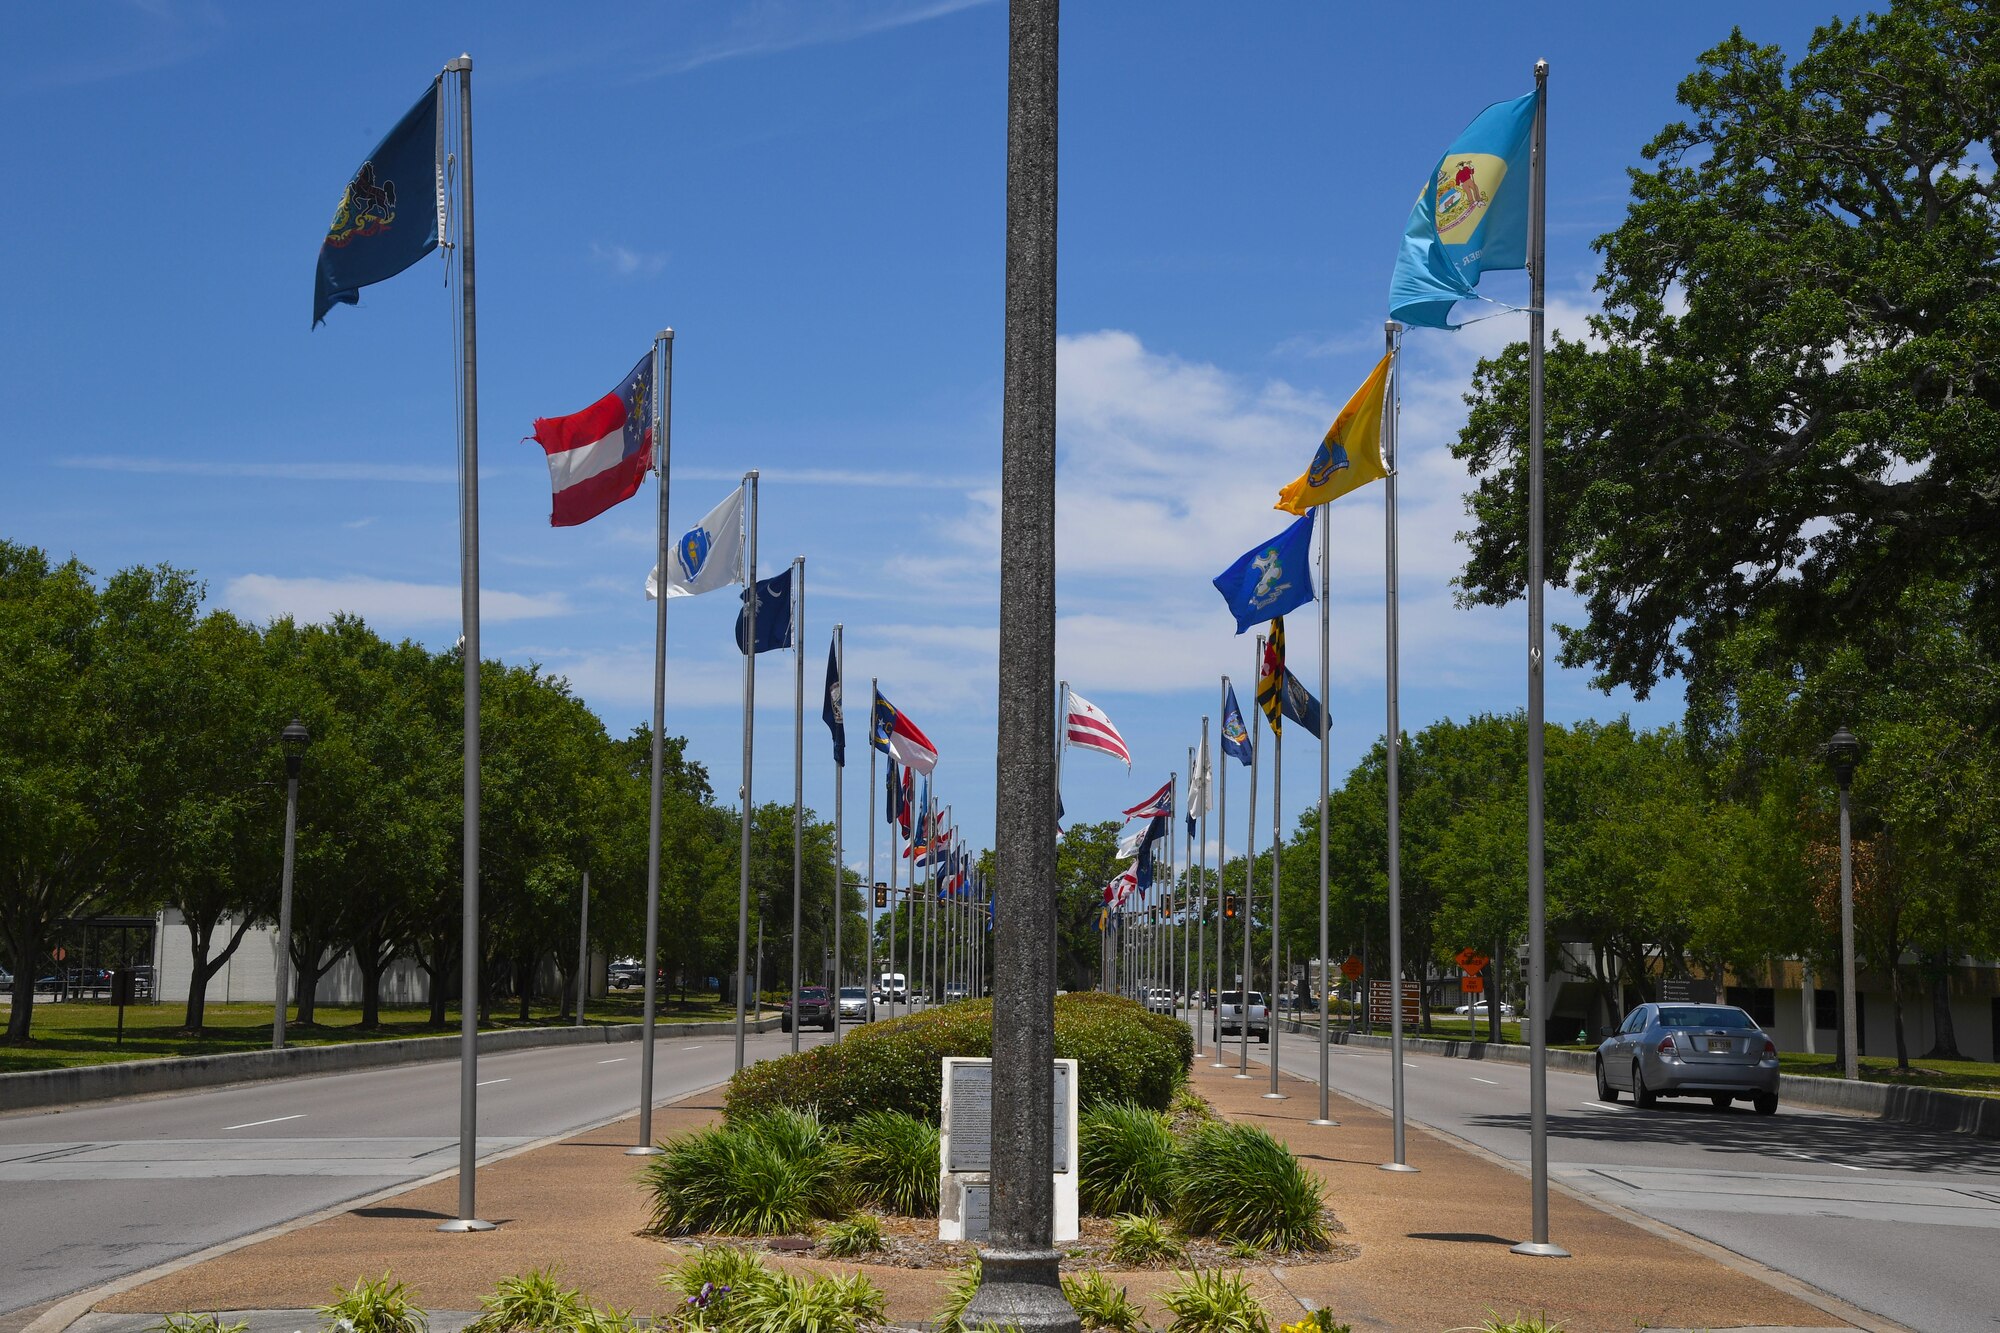 The Boulevard of Flags was established on Oct. 4, 1988 by the John C. Stennis Chapter of the Air Force Association to represent and honor the homes of our technical training students. It includes the 50 U.S. state flags and the flags for the District of Columbia and all 5 U.S. territories and is currently maintained by the 81st Training Wing Protocol Office. The monument is a reminder today of the history of each flag and the diverse culture of the U.S. military. (U.S. Air Force photo by Kemberly Groue)